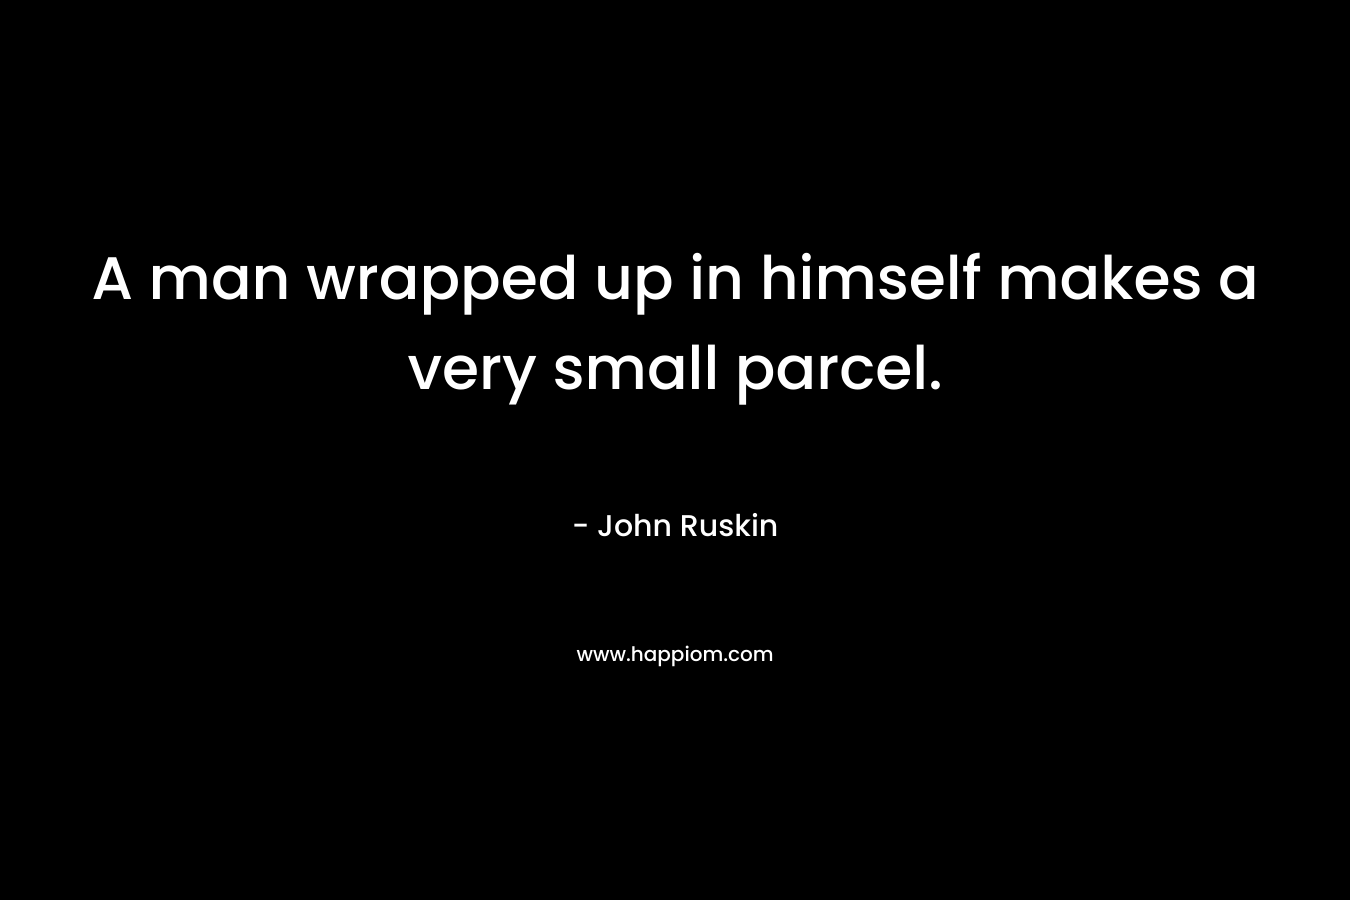 A man wrapped up in himself makes a very small parcel. – John Ruskin